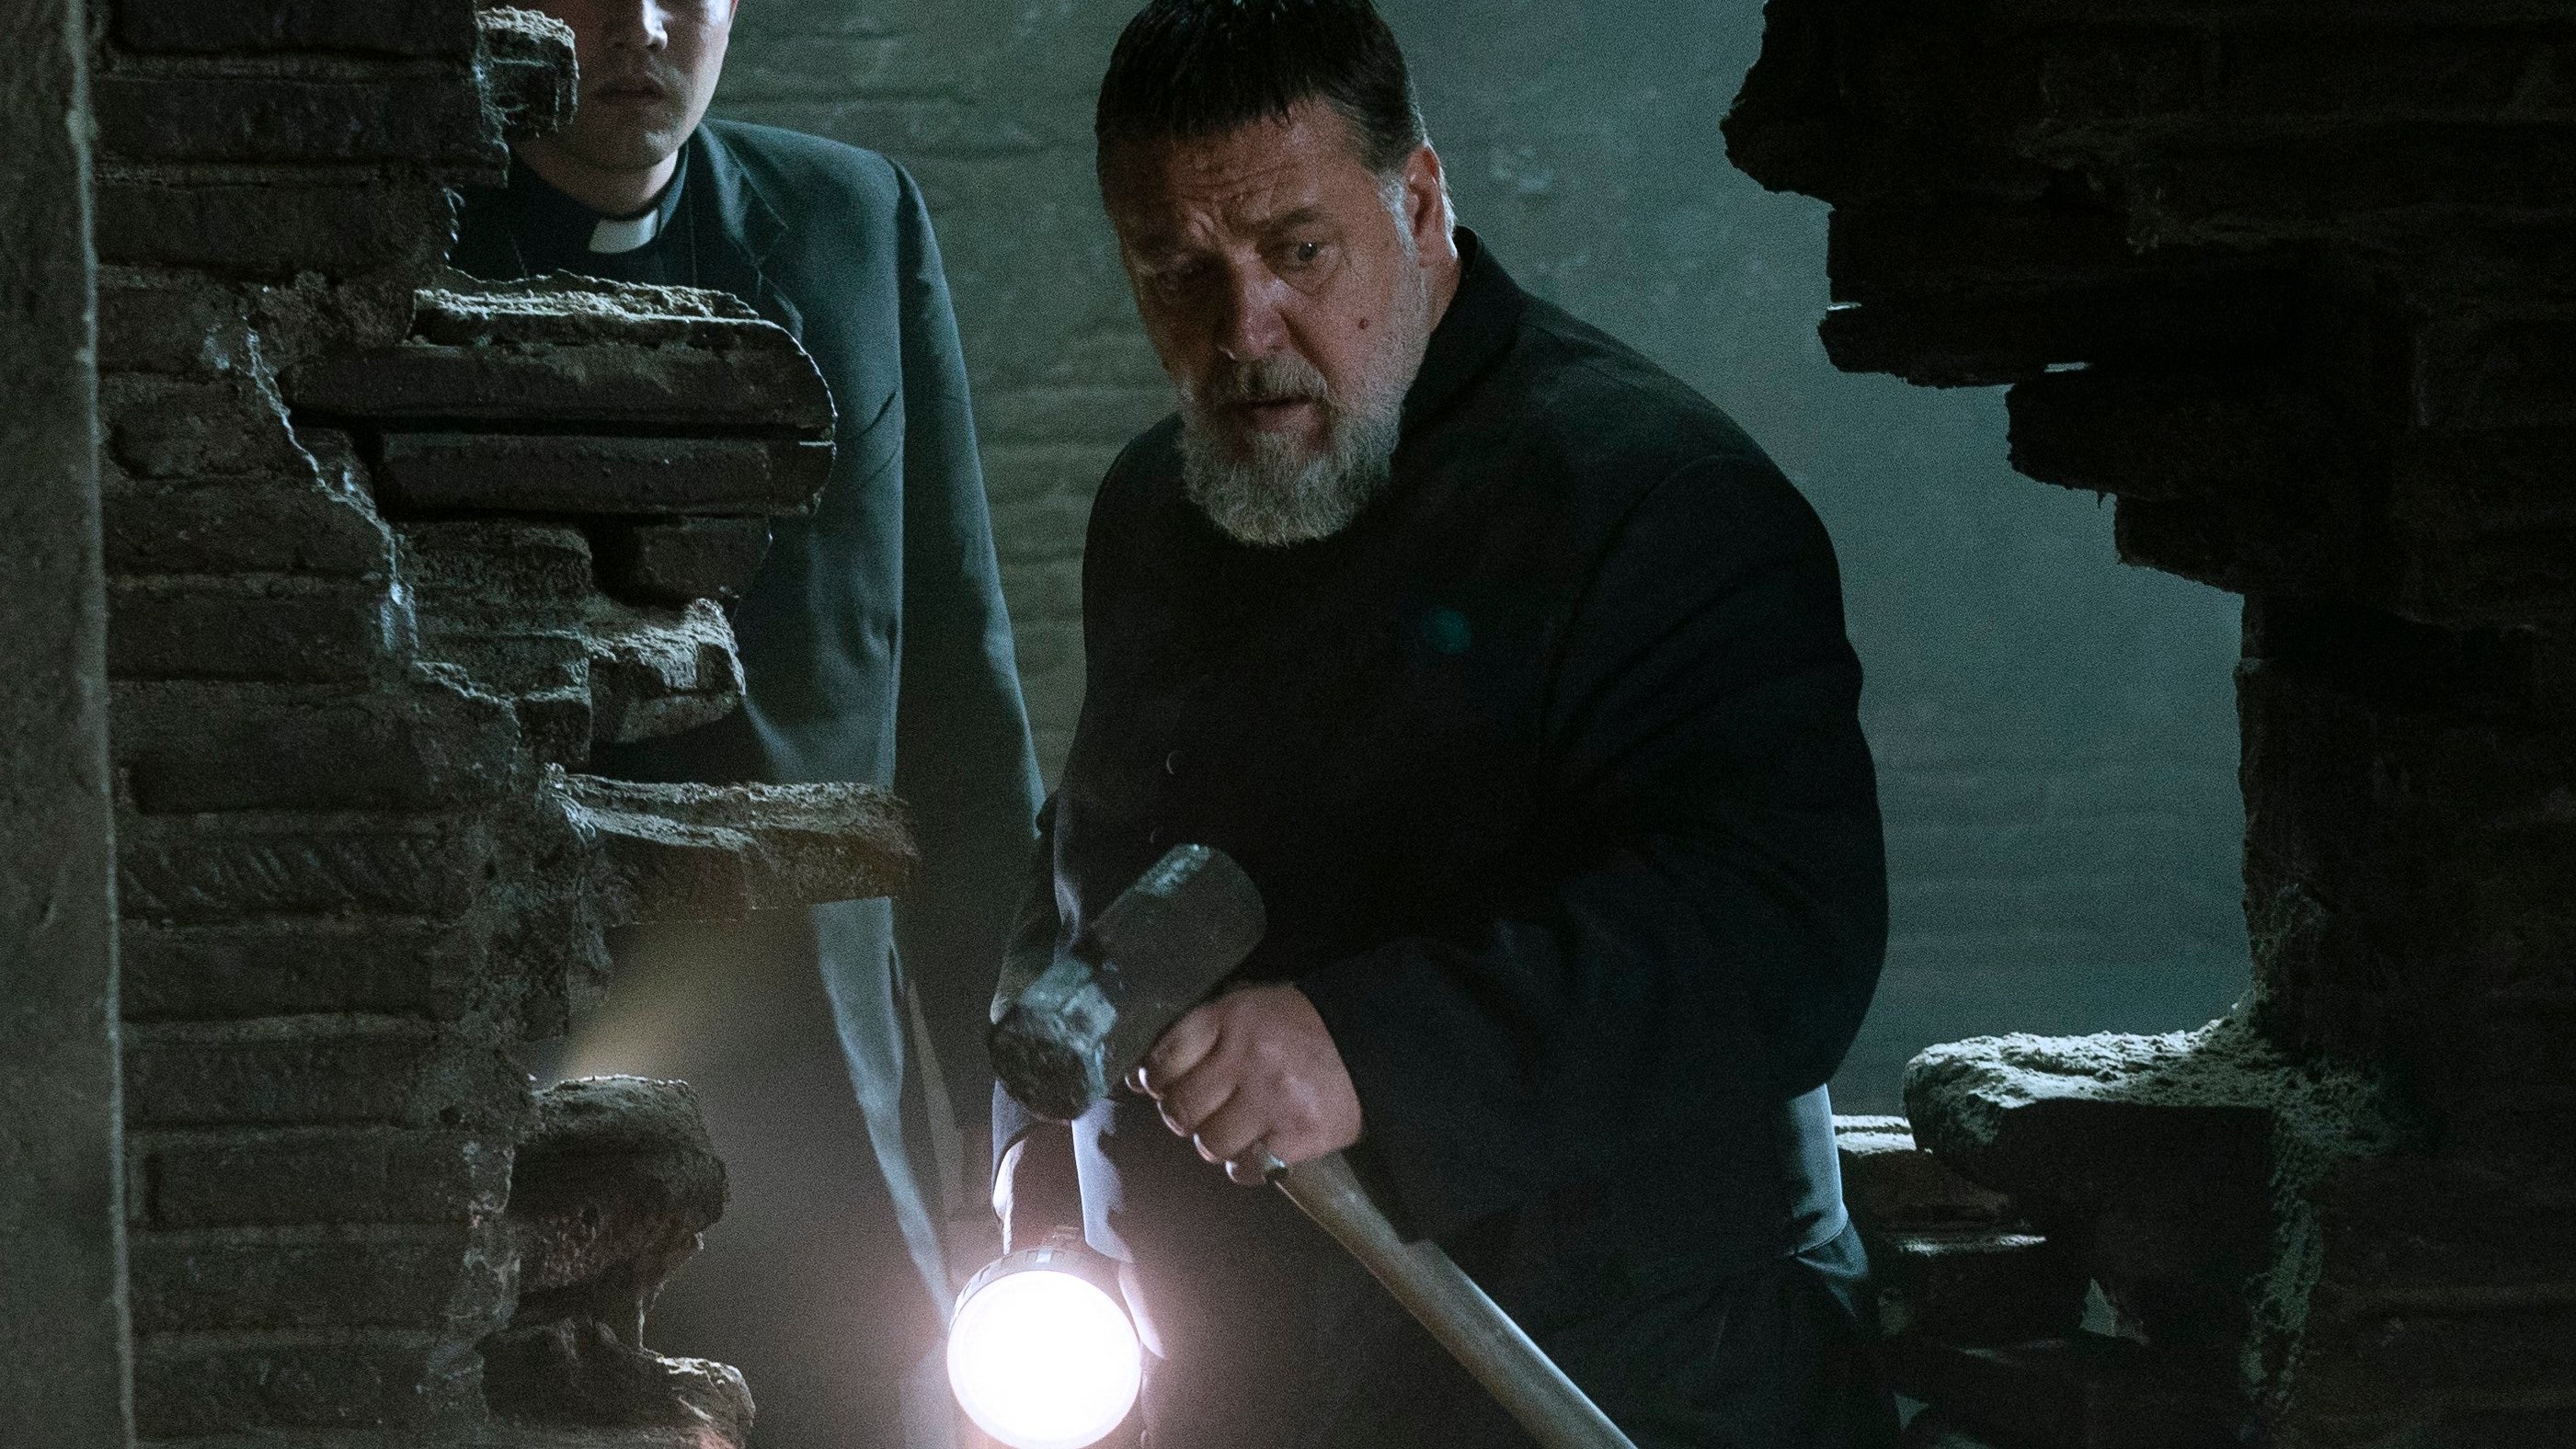 russell crowe as a priest, having just broken down a brick wall with a hammer